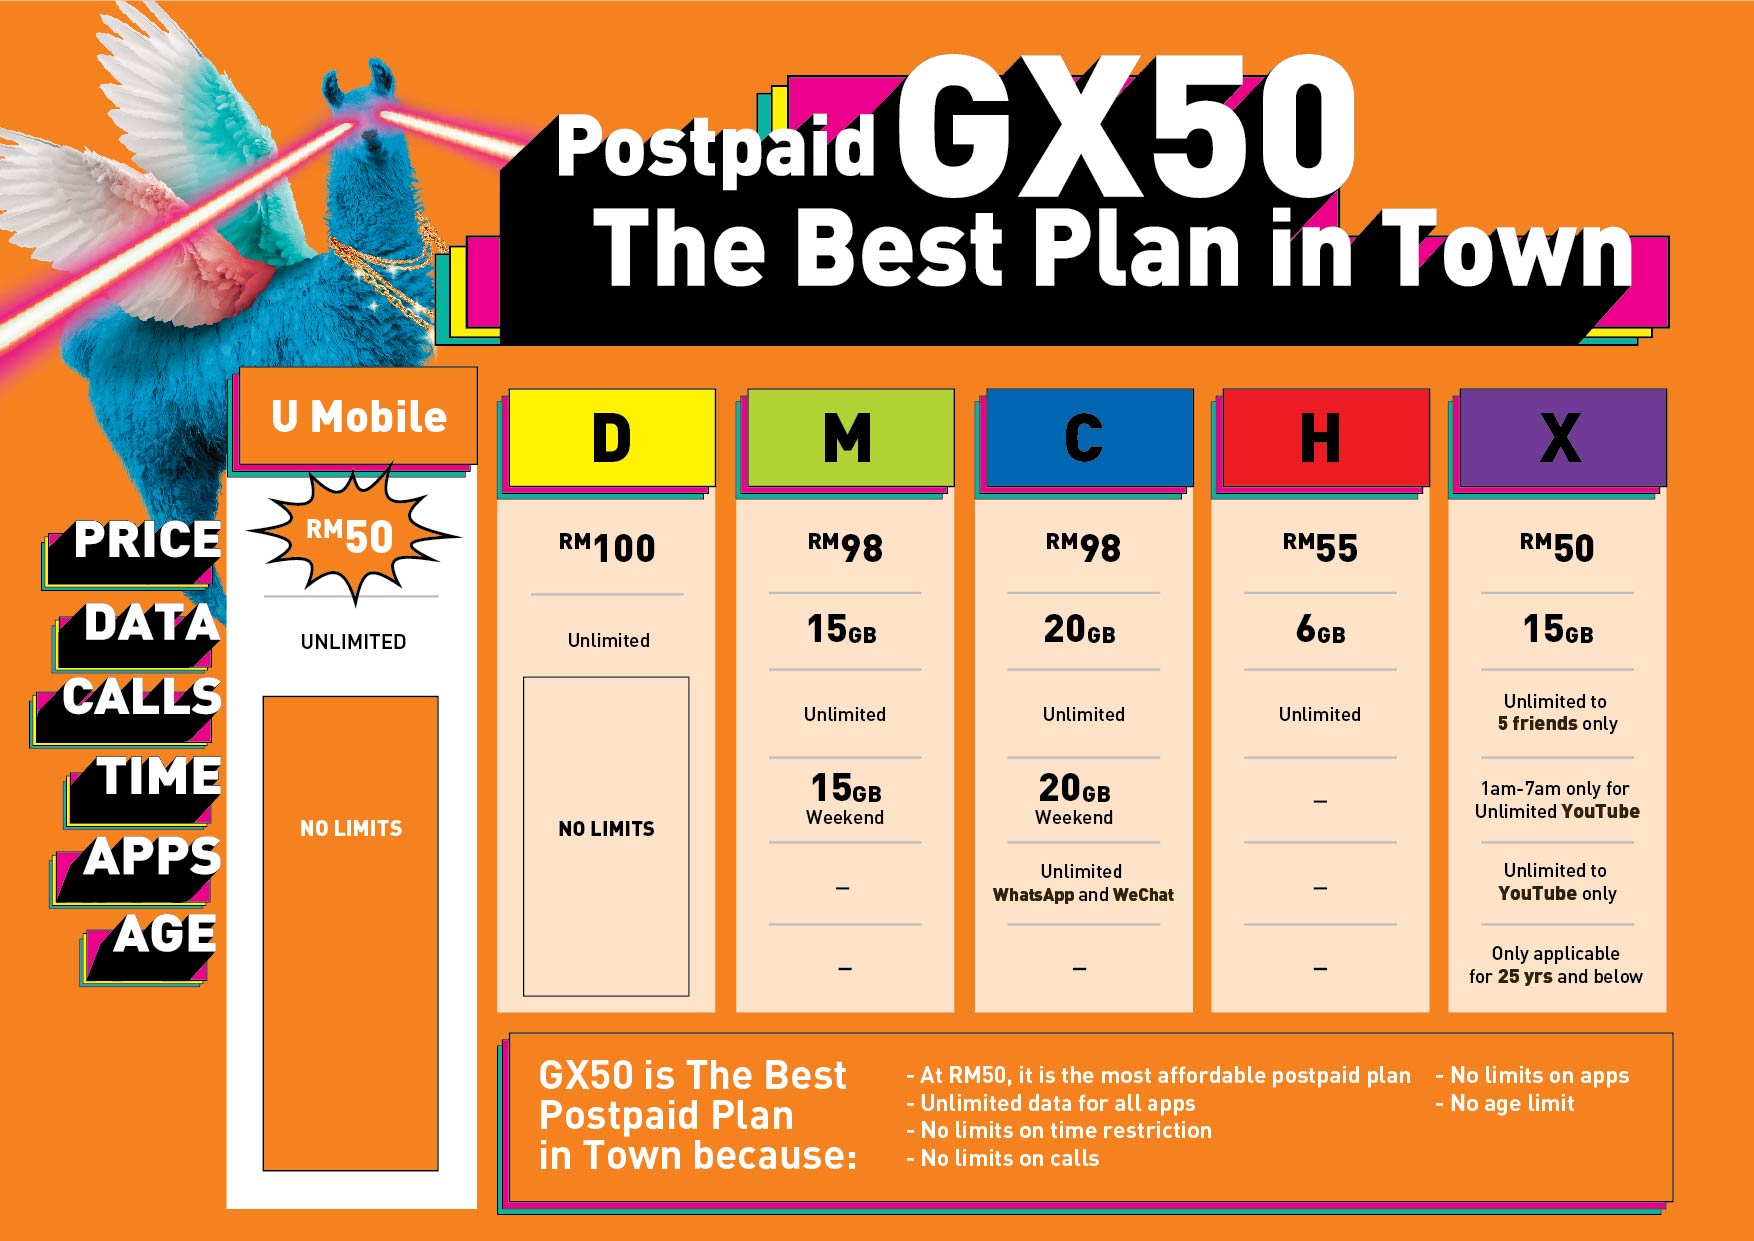 U Mobile U Mobile S Latest Giler Unlimited Postpaid And Prepaid Plans Are Best In Town Offering Unlimited Data Anytime Any Day